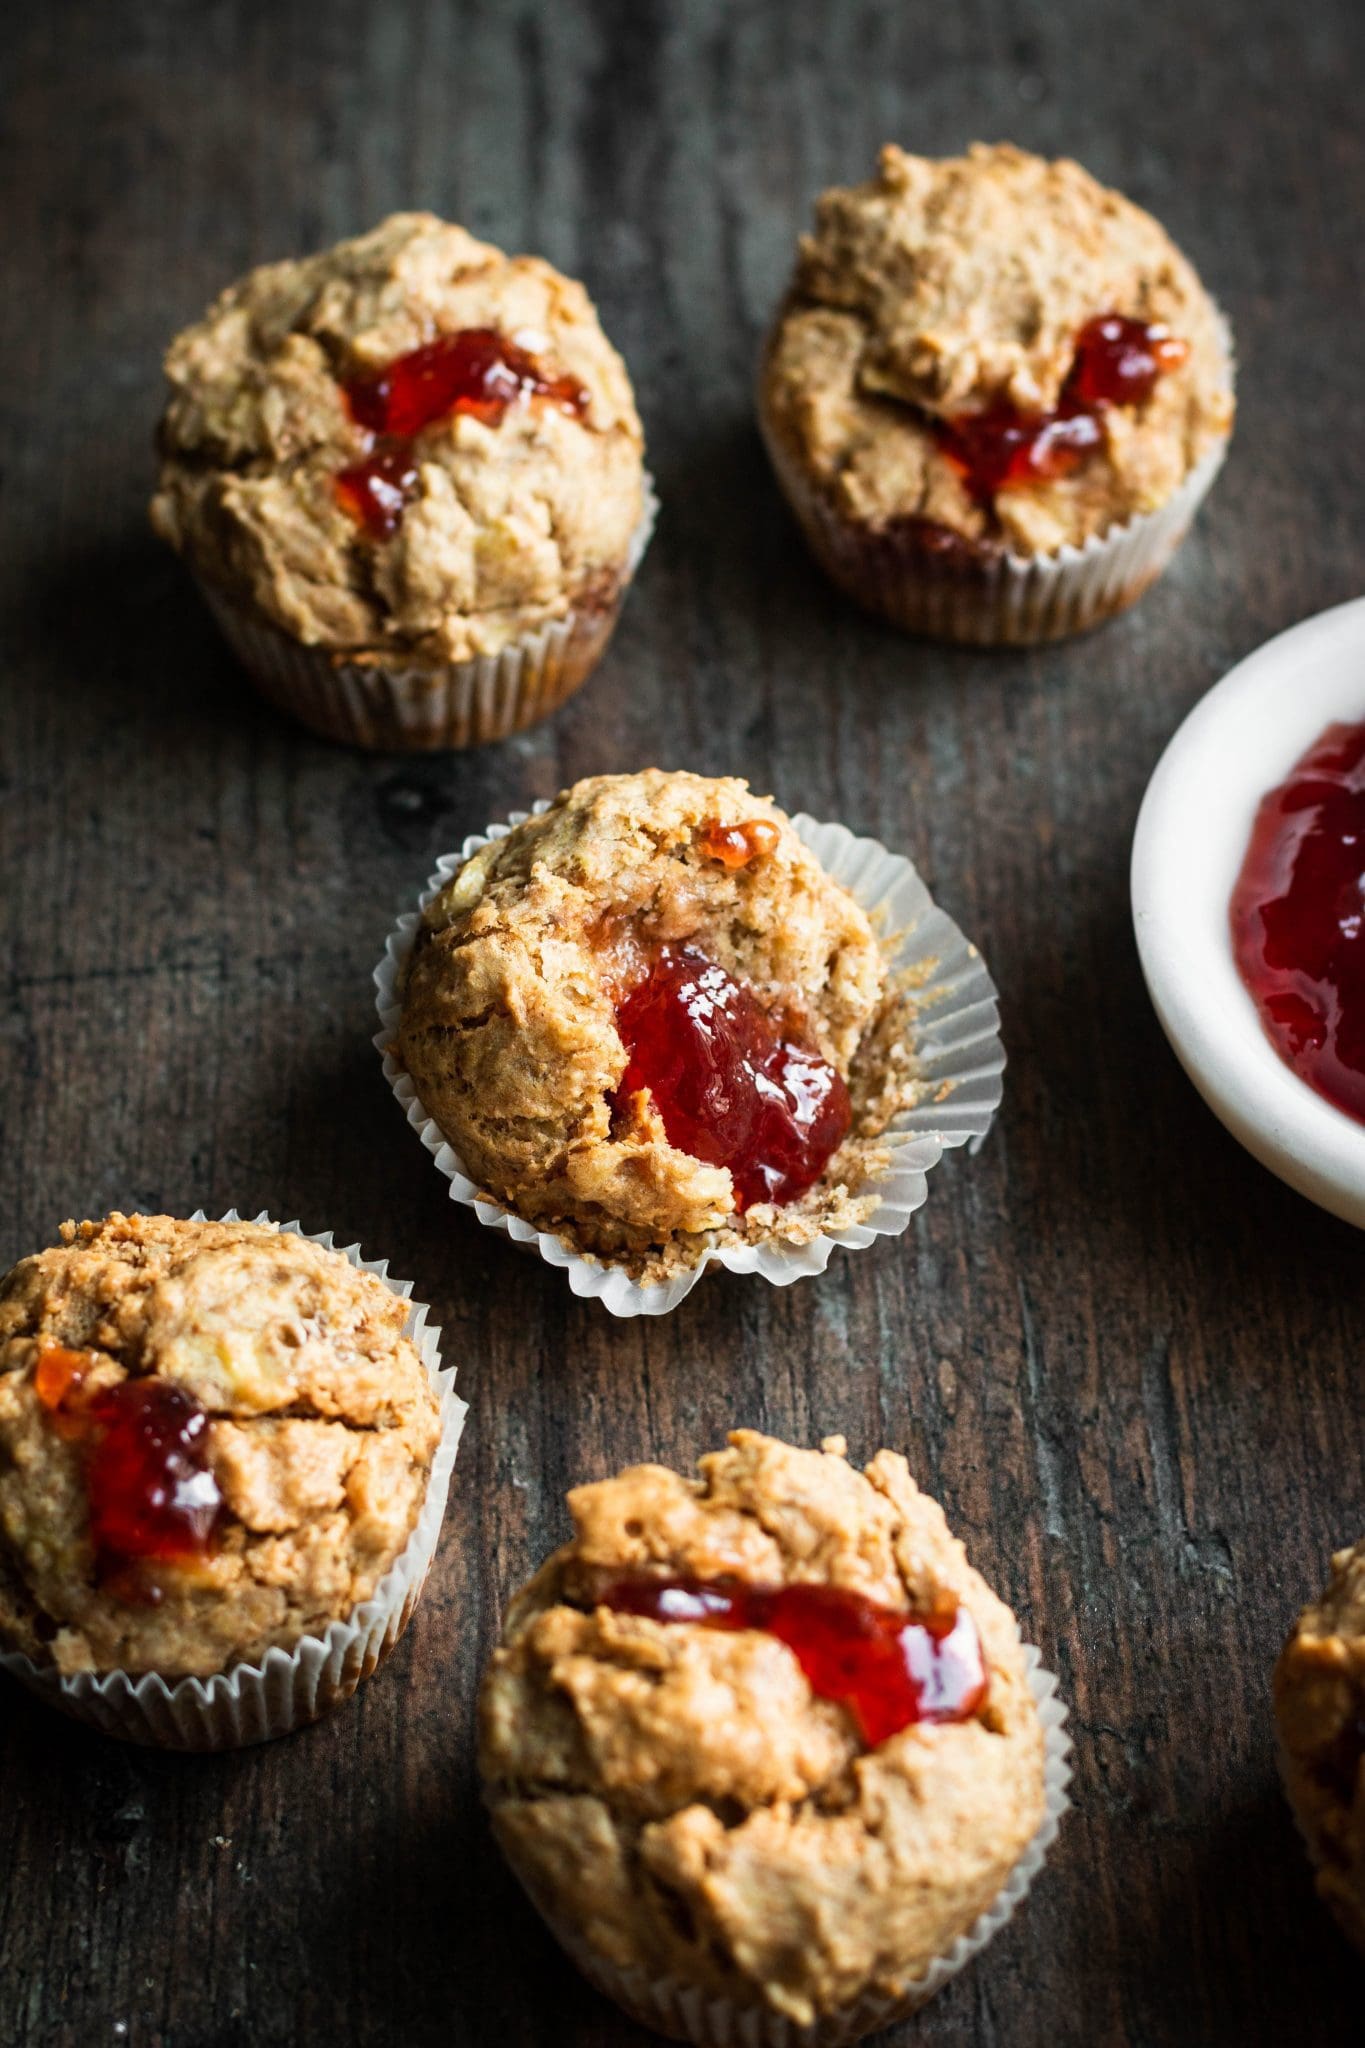 peanut butter jelly muffins - 132 vegan recipes to start the new year